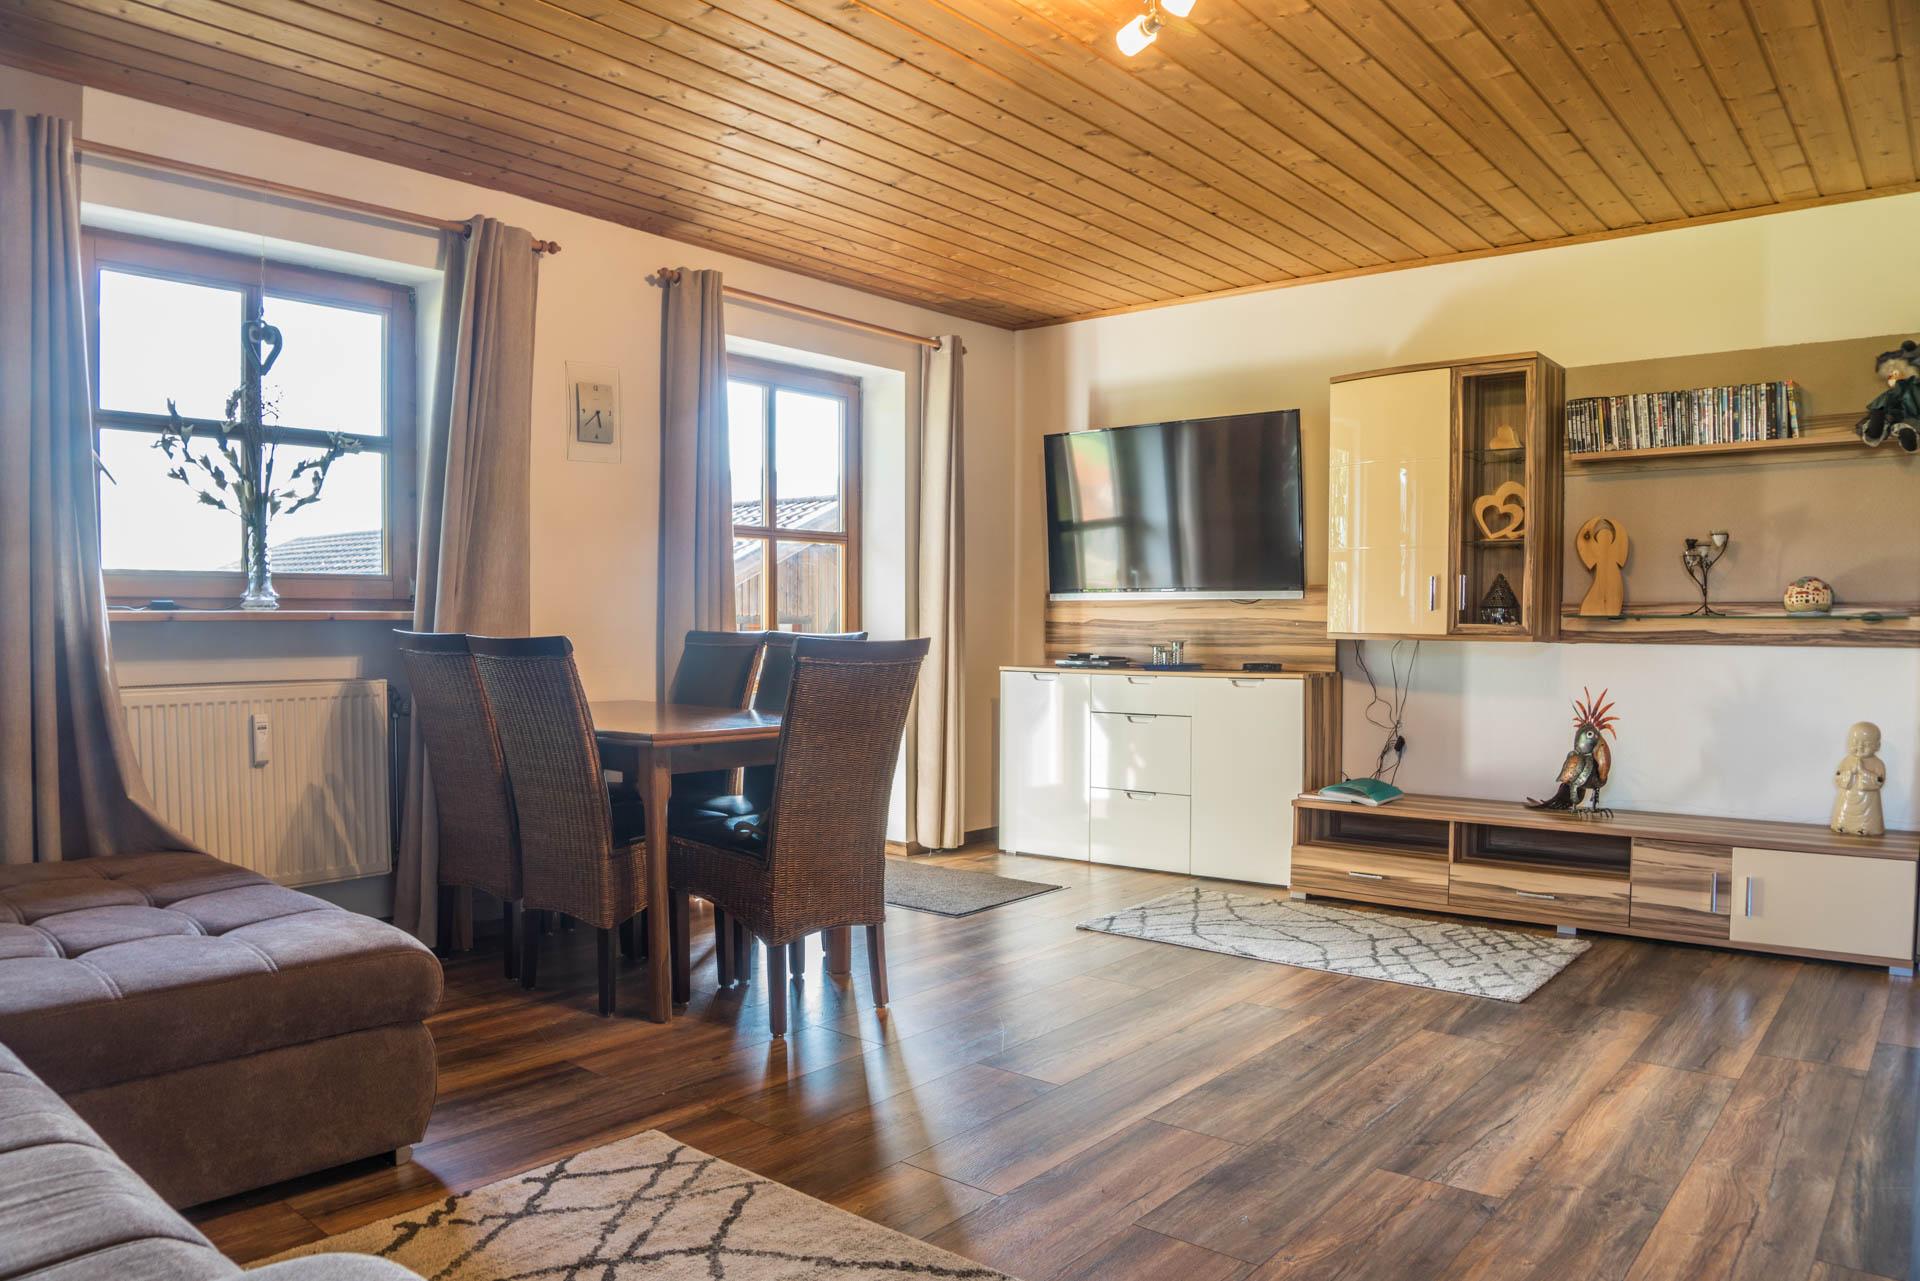 the living room of the holiday apartment with sauna